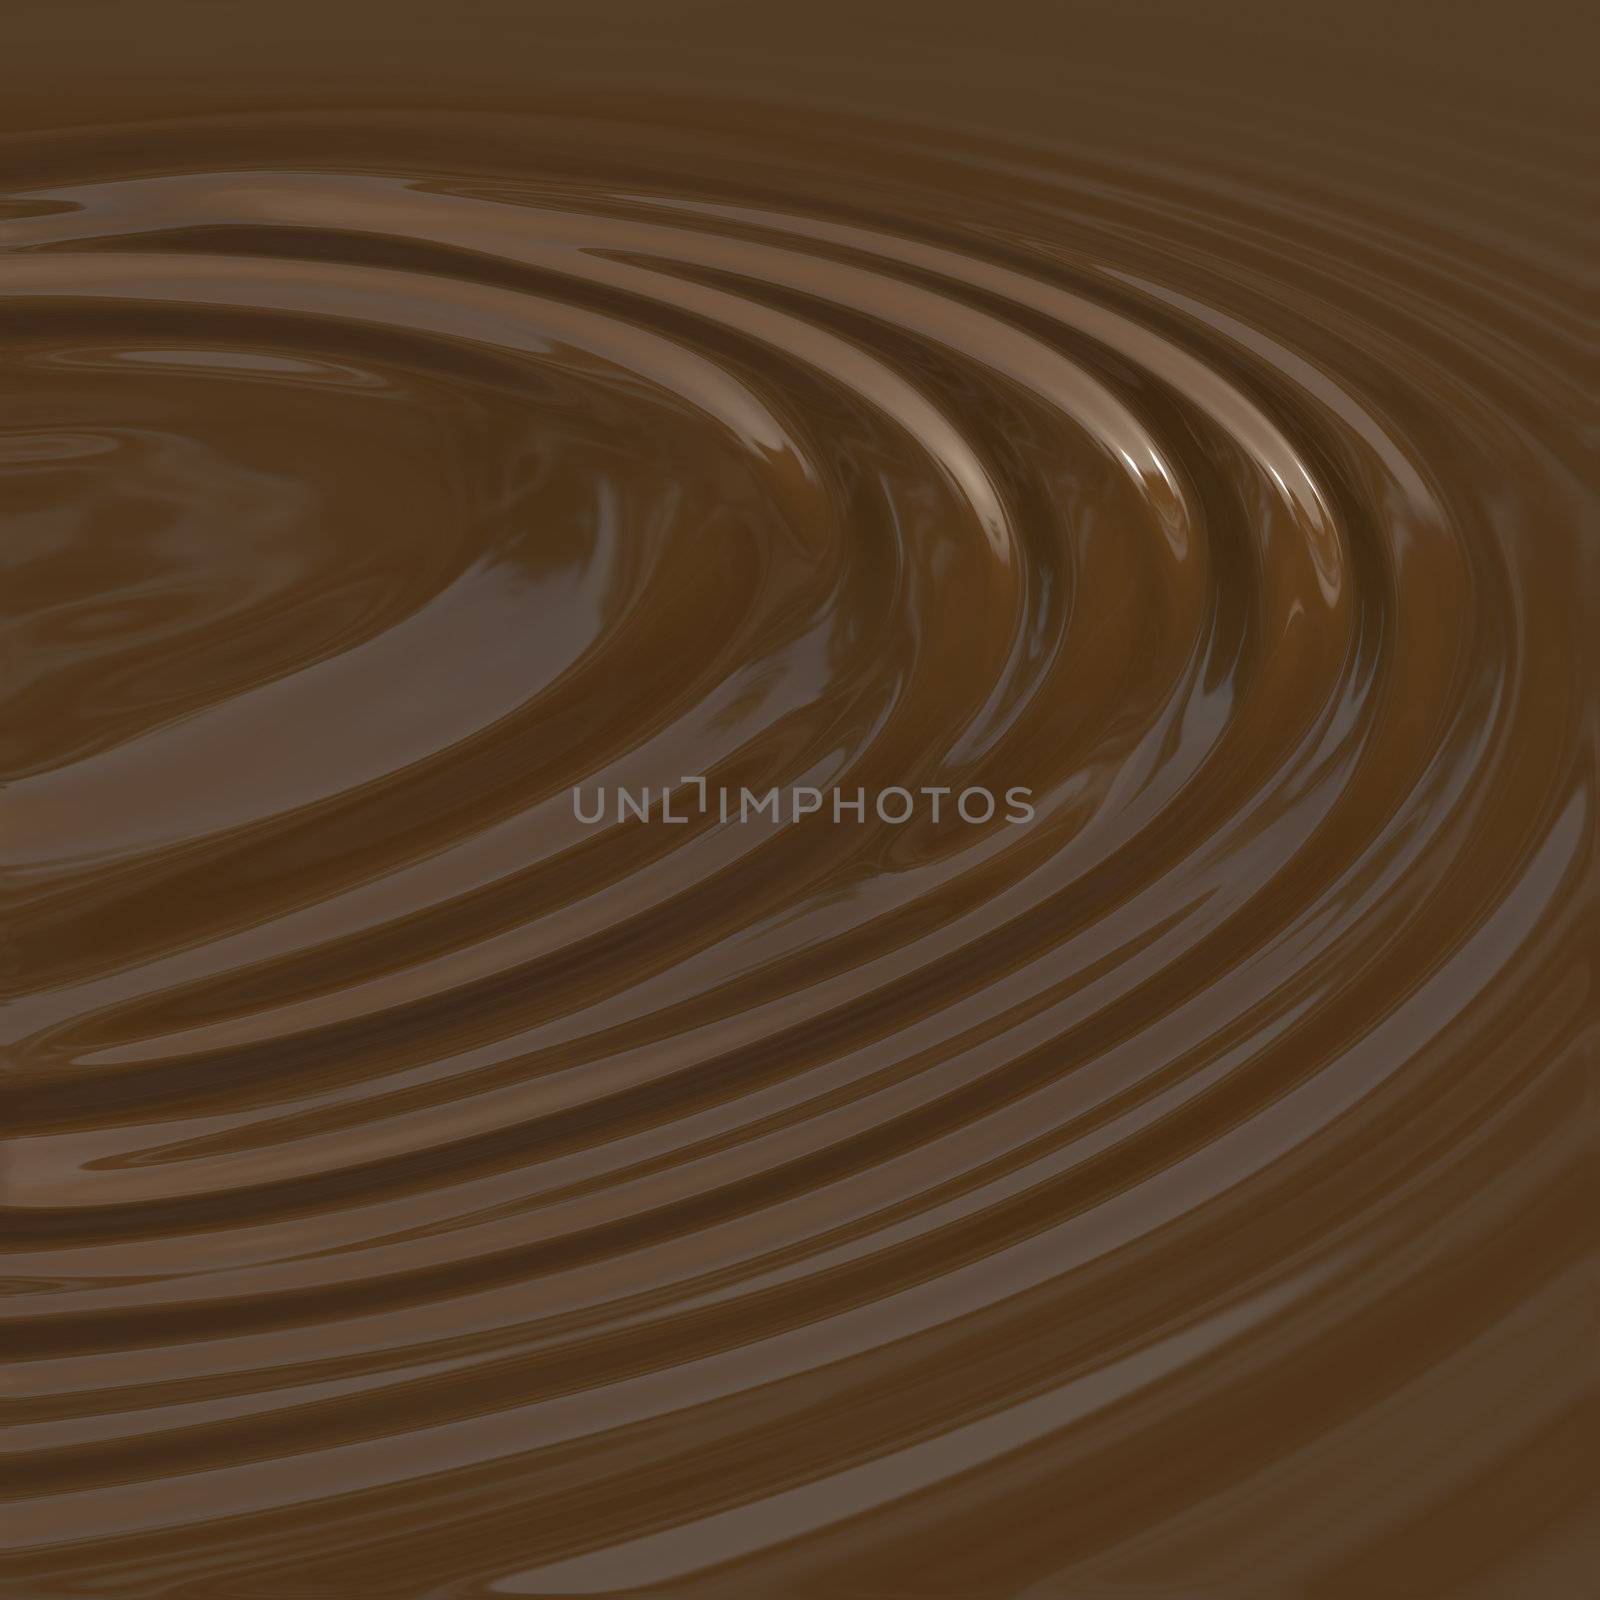 Smooth liquid chocolate background that looks good enough to drink with a straw.  Could also be coffee, hot cocoa, anything brown (eww...nevermind I said that) but you get the idea.